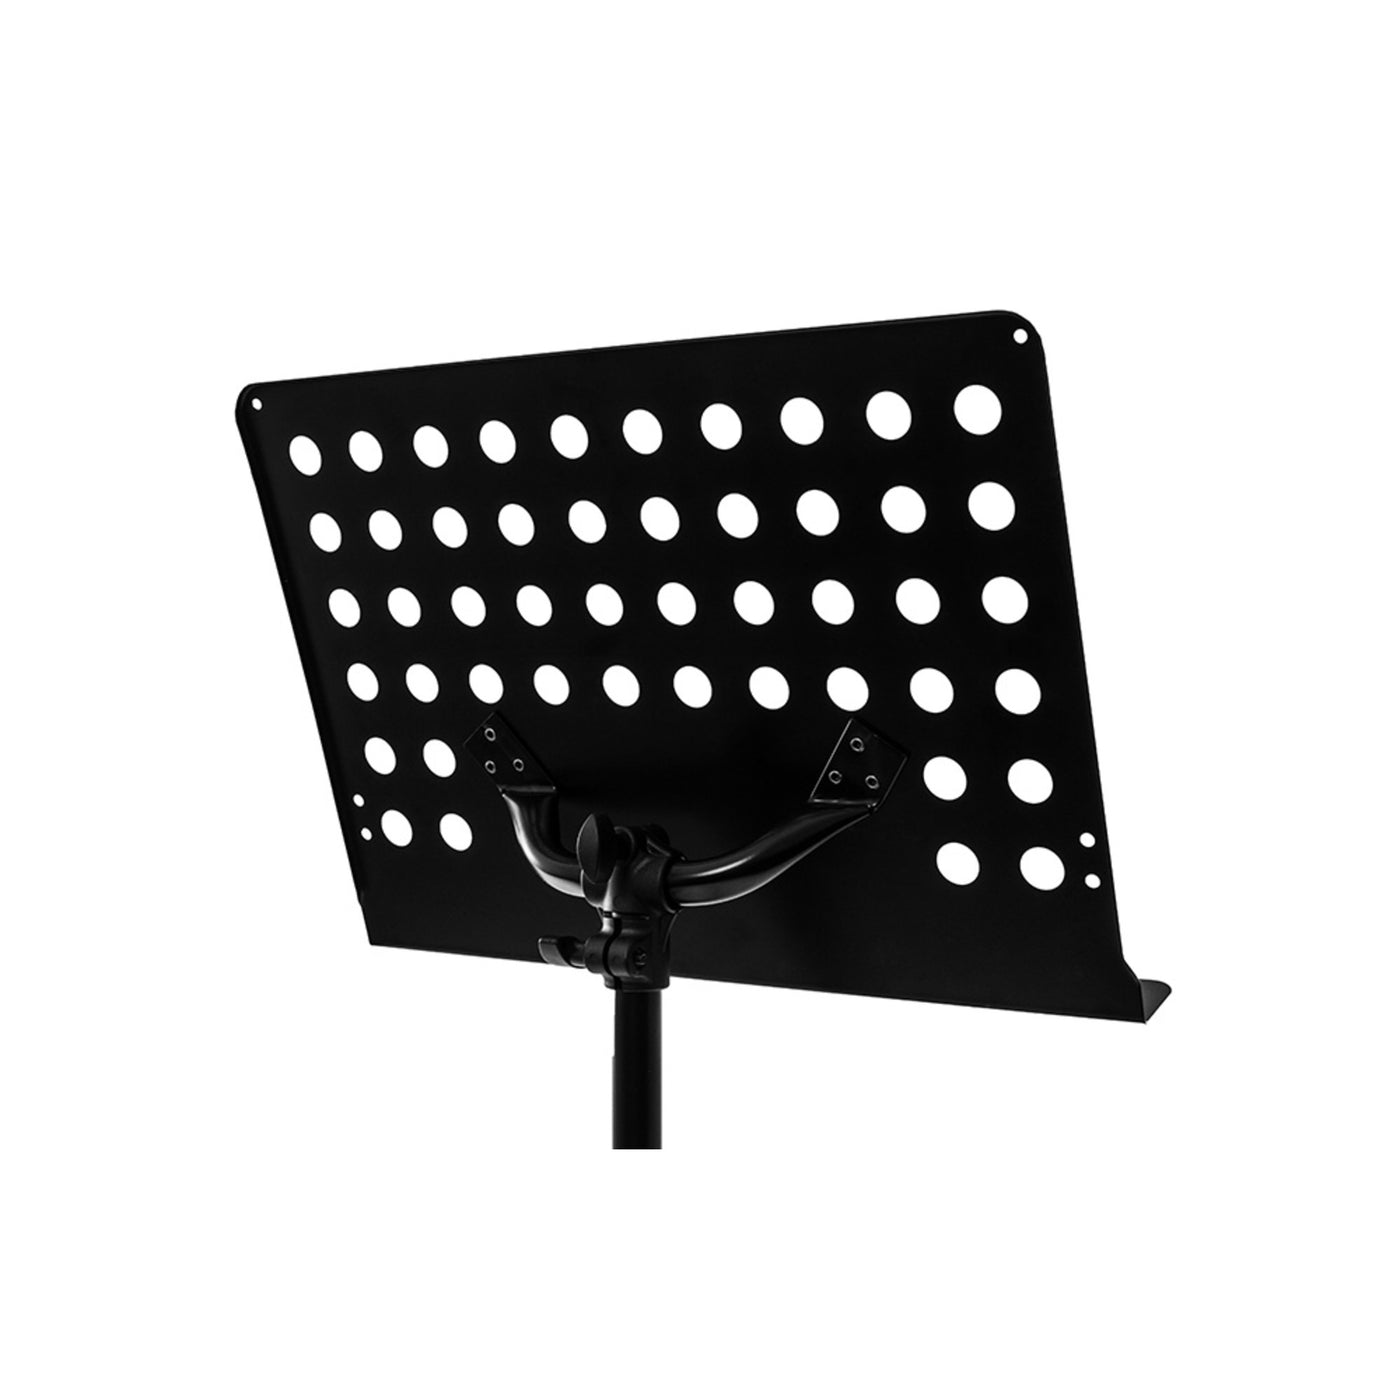 Nomad Orchestral Music Stand with Perforated Desk (NBS-1310)